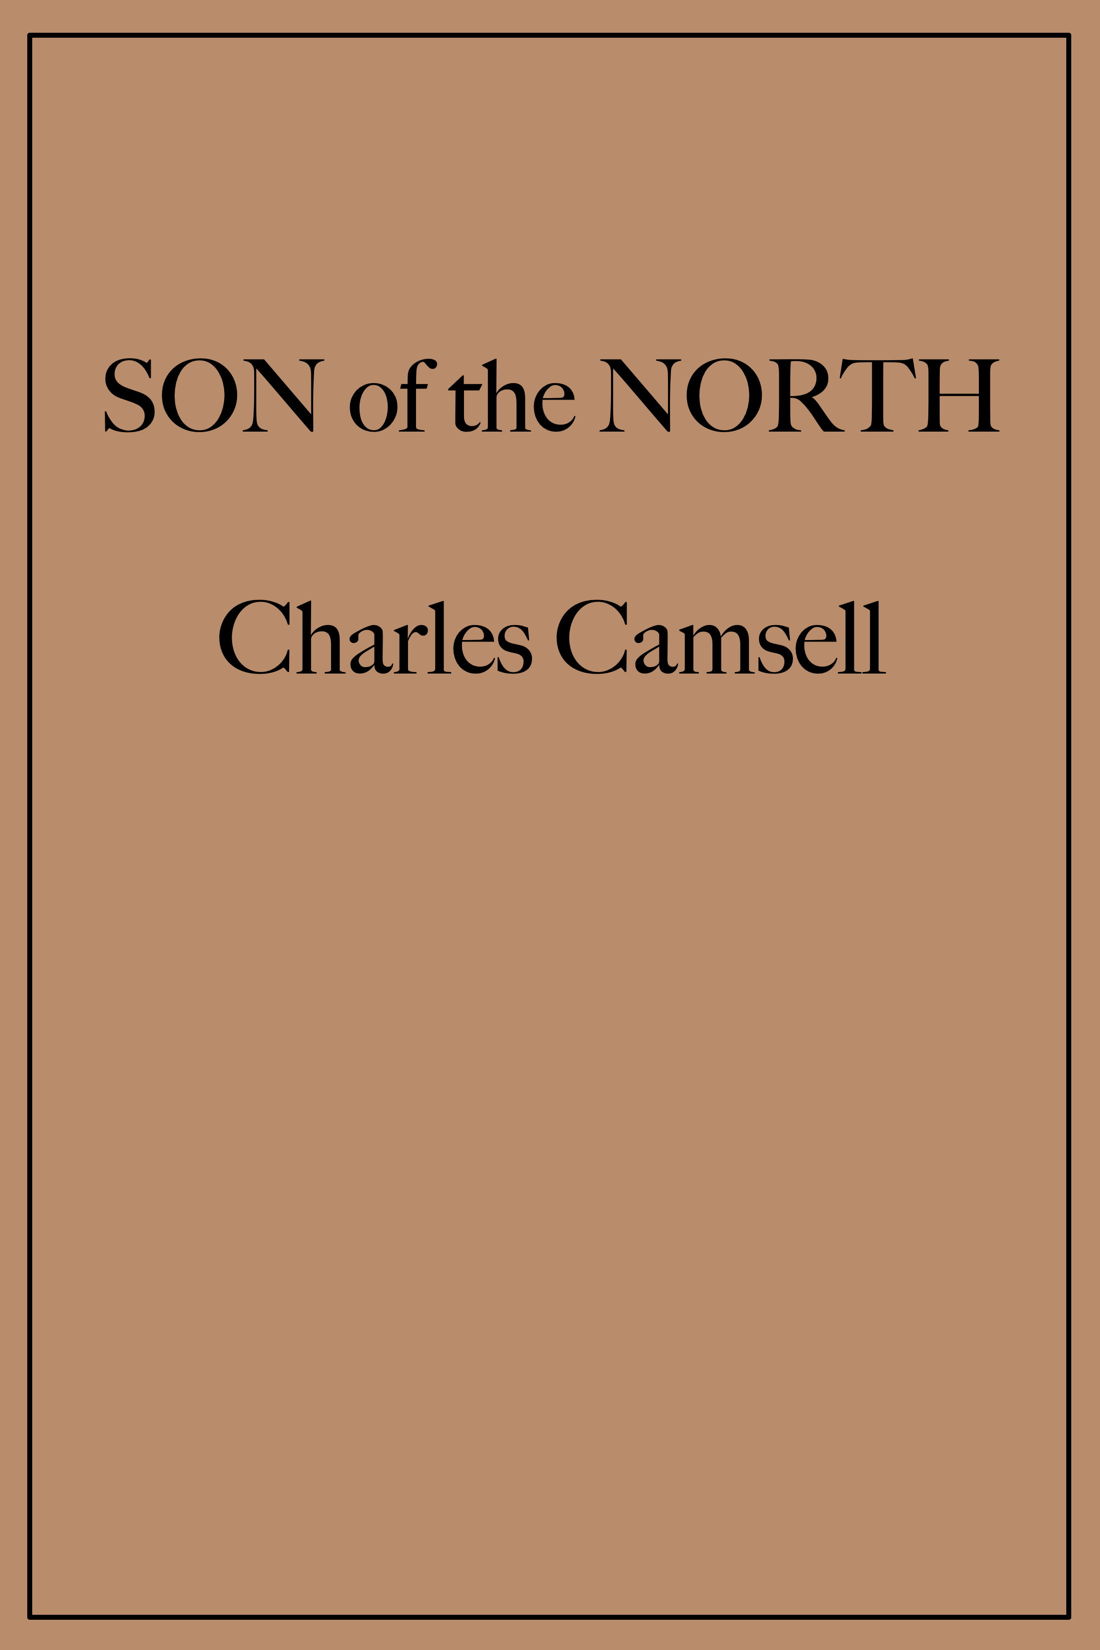 The Distributed Proofreaders Canada eBook of Son of the North